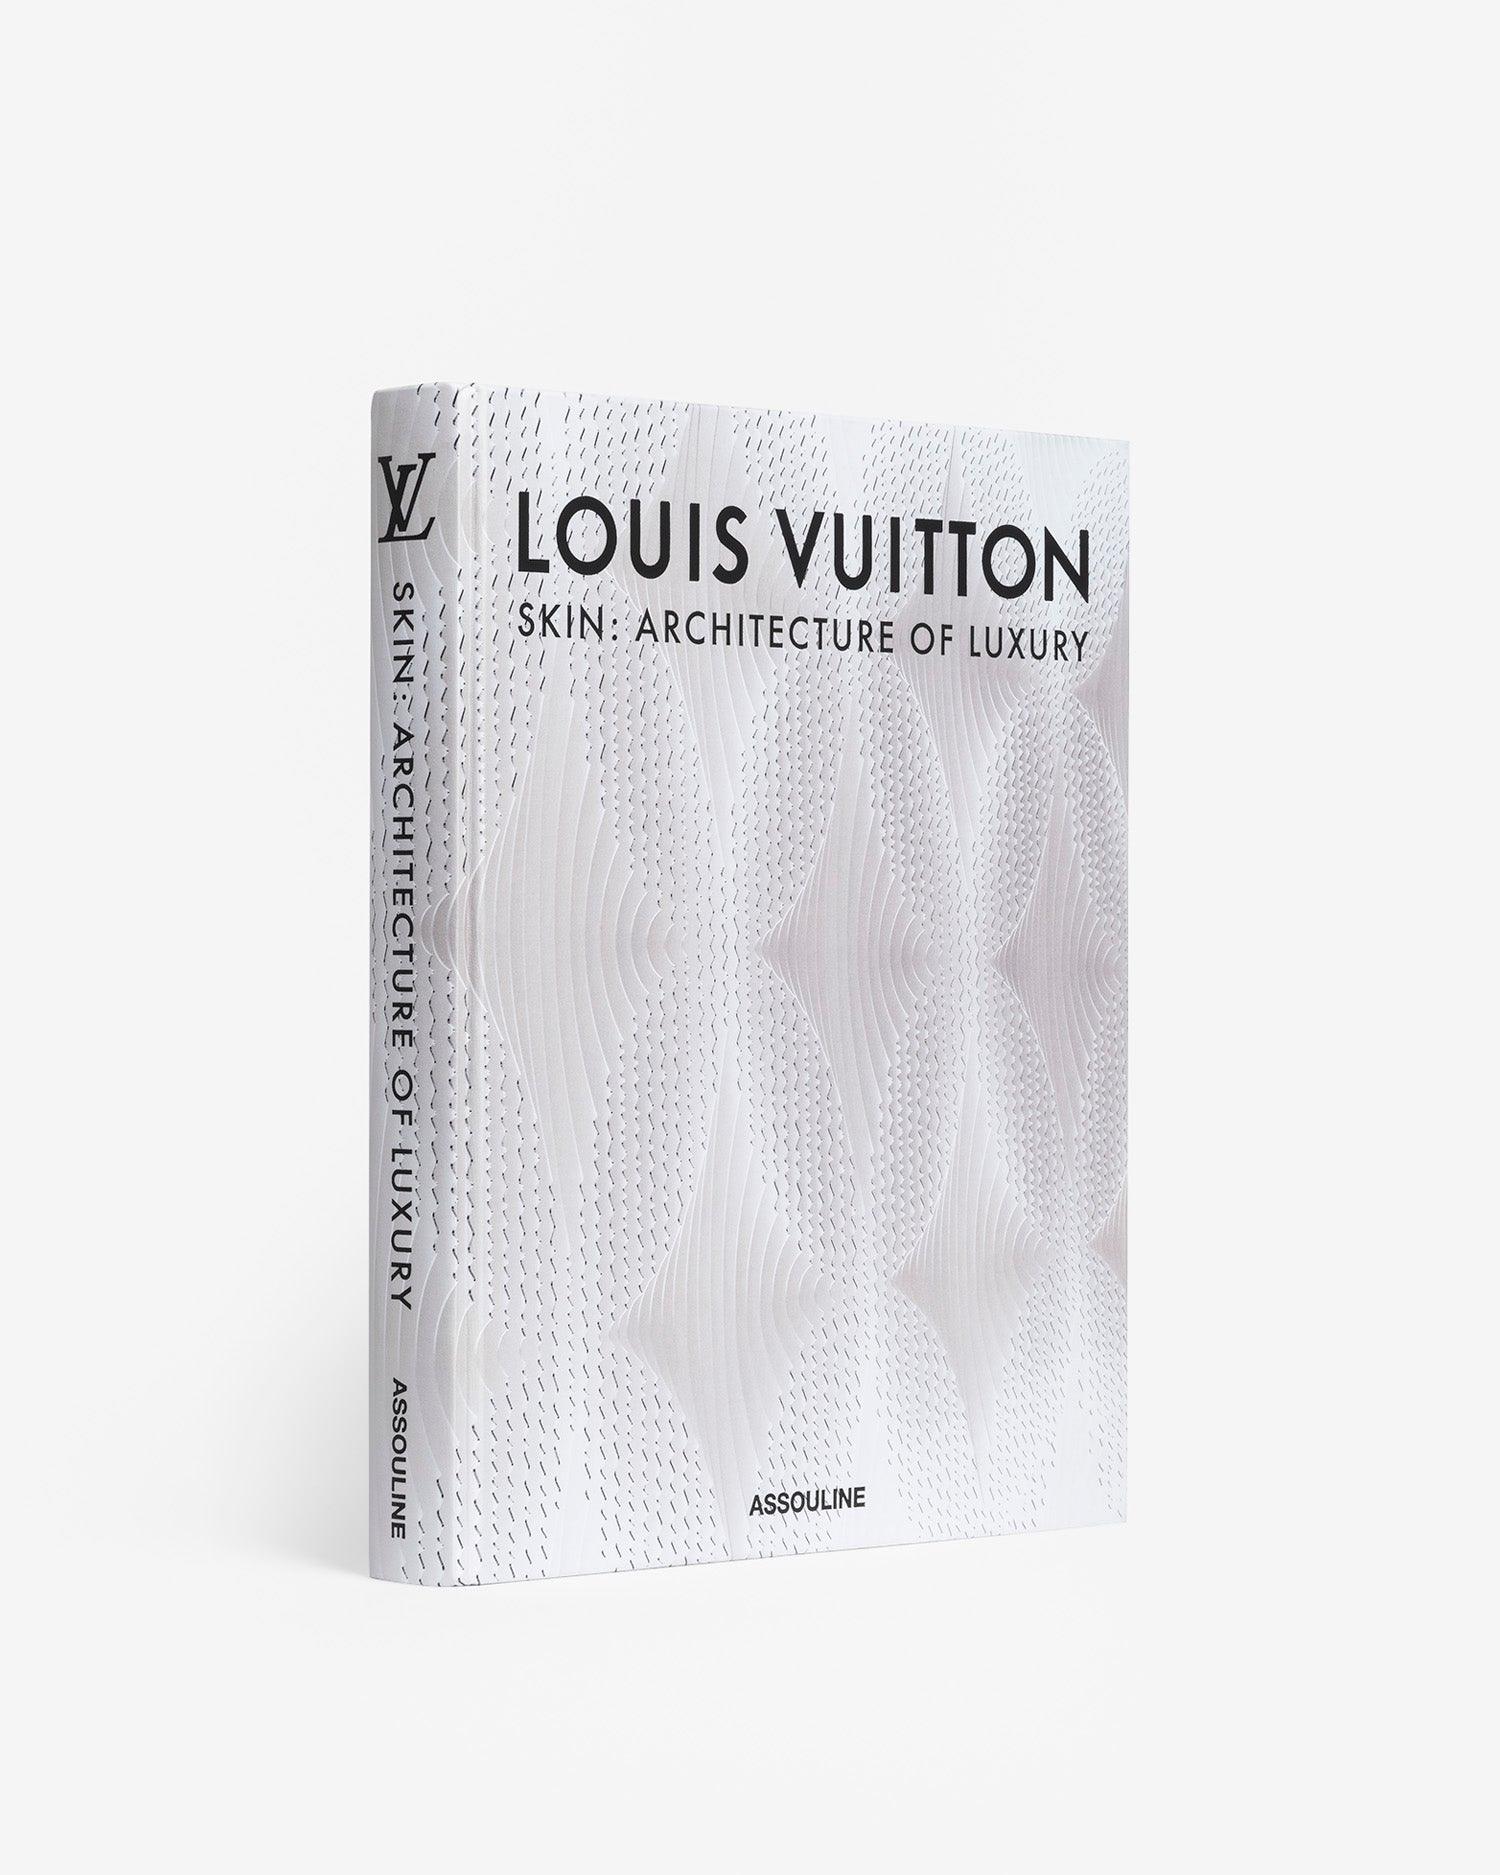 Louis Vuitton Skin: Architecture of Luxury (New York City Edition) by 